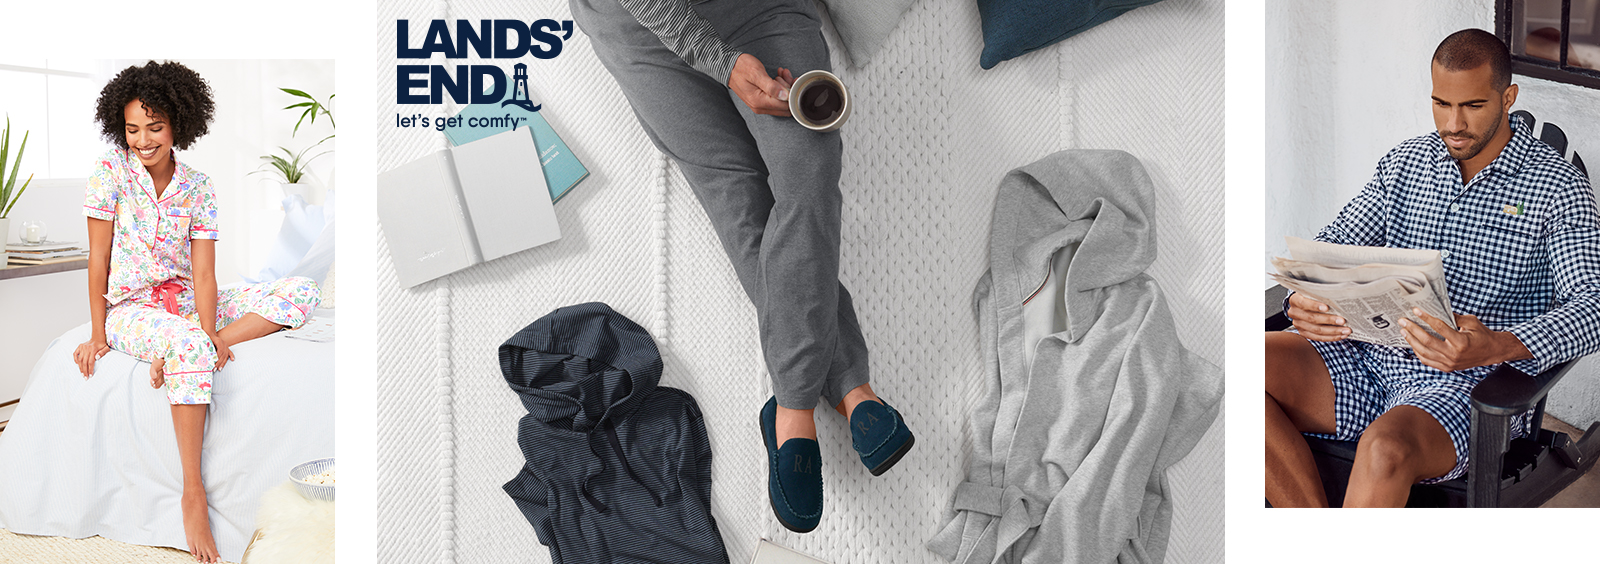 How to Style Your PJs as Your Look | Lands' End